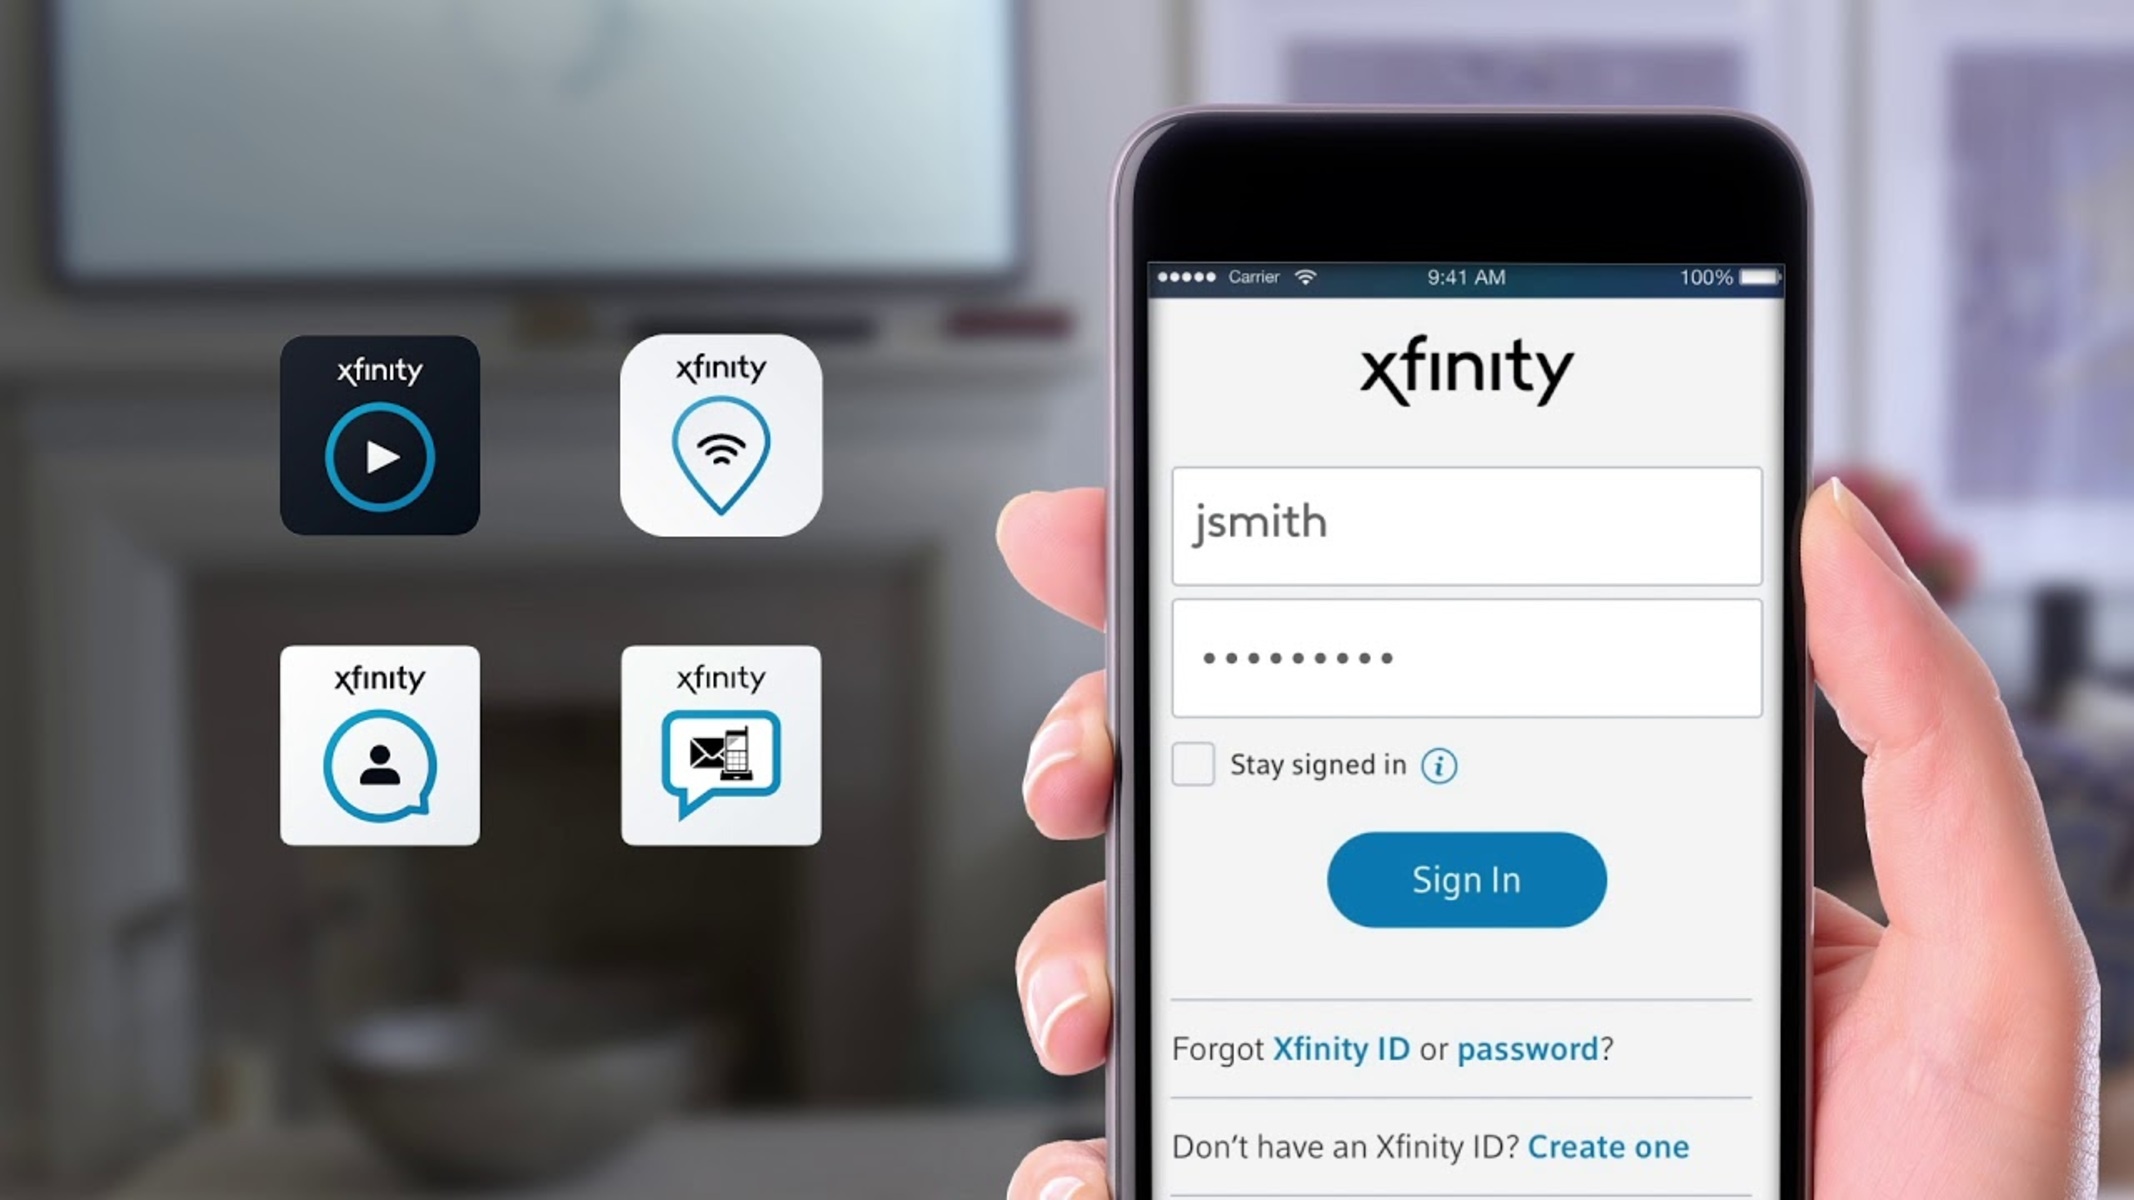 connecting-to-xfinity-hotspot-quick-guide